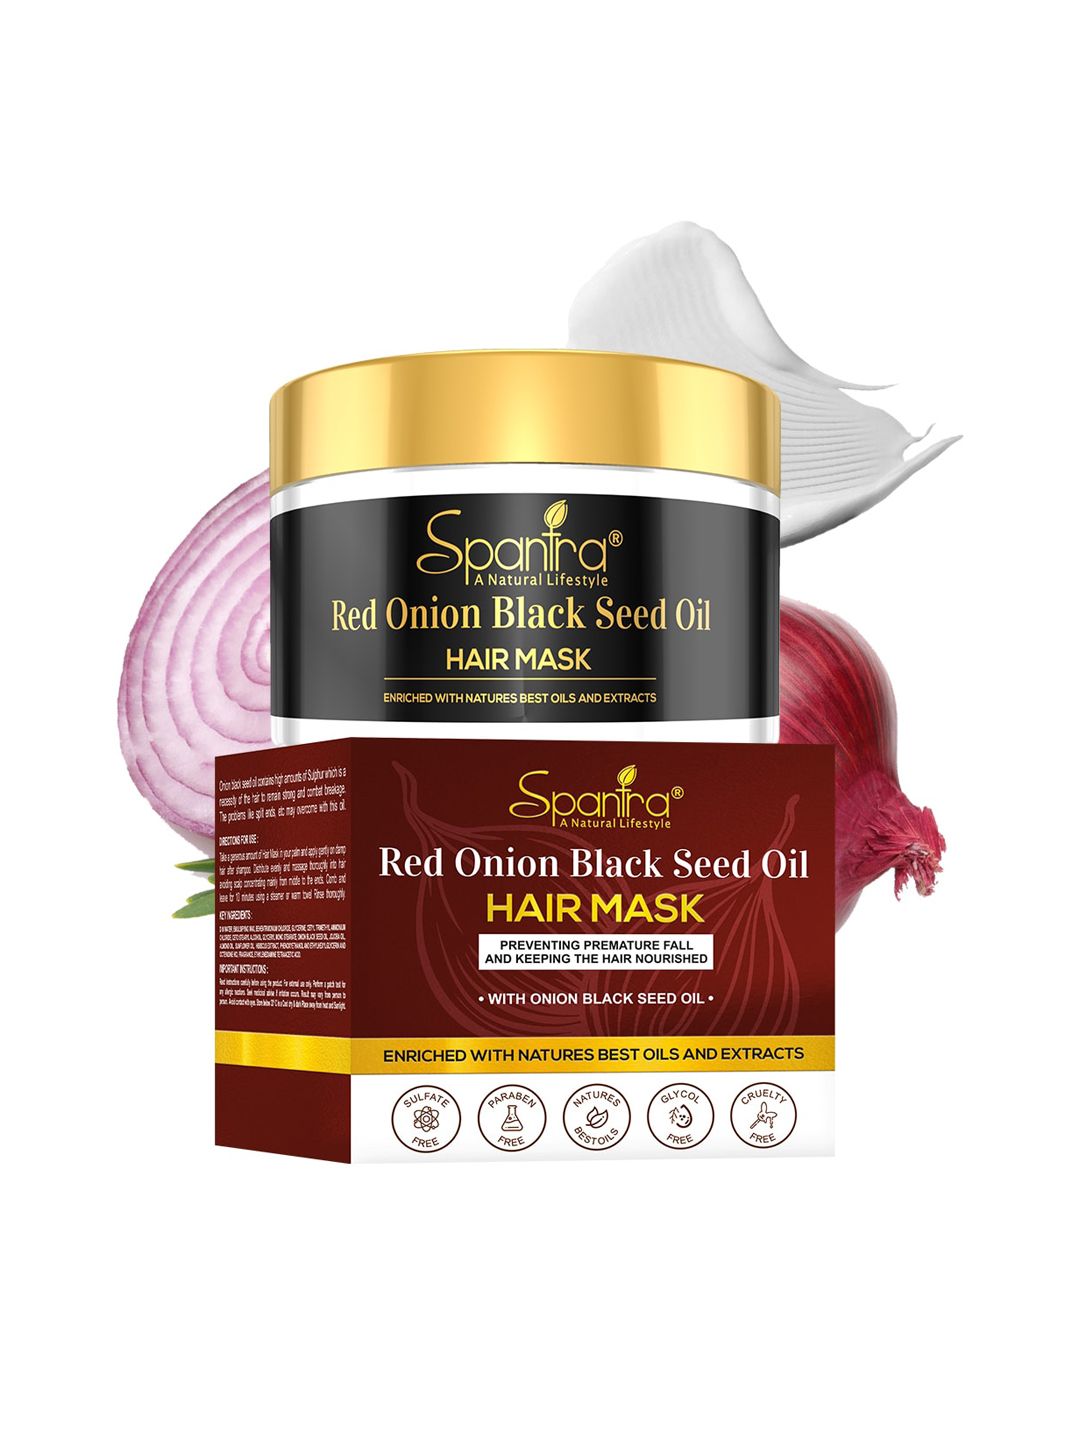 Spantra Red Onion Black Seed Oil Hair Mask 250gram Price in India